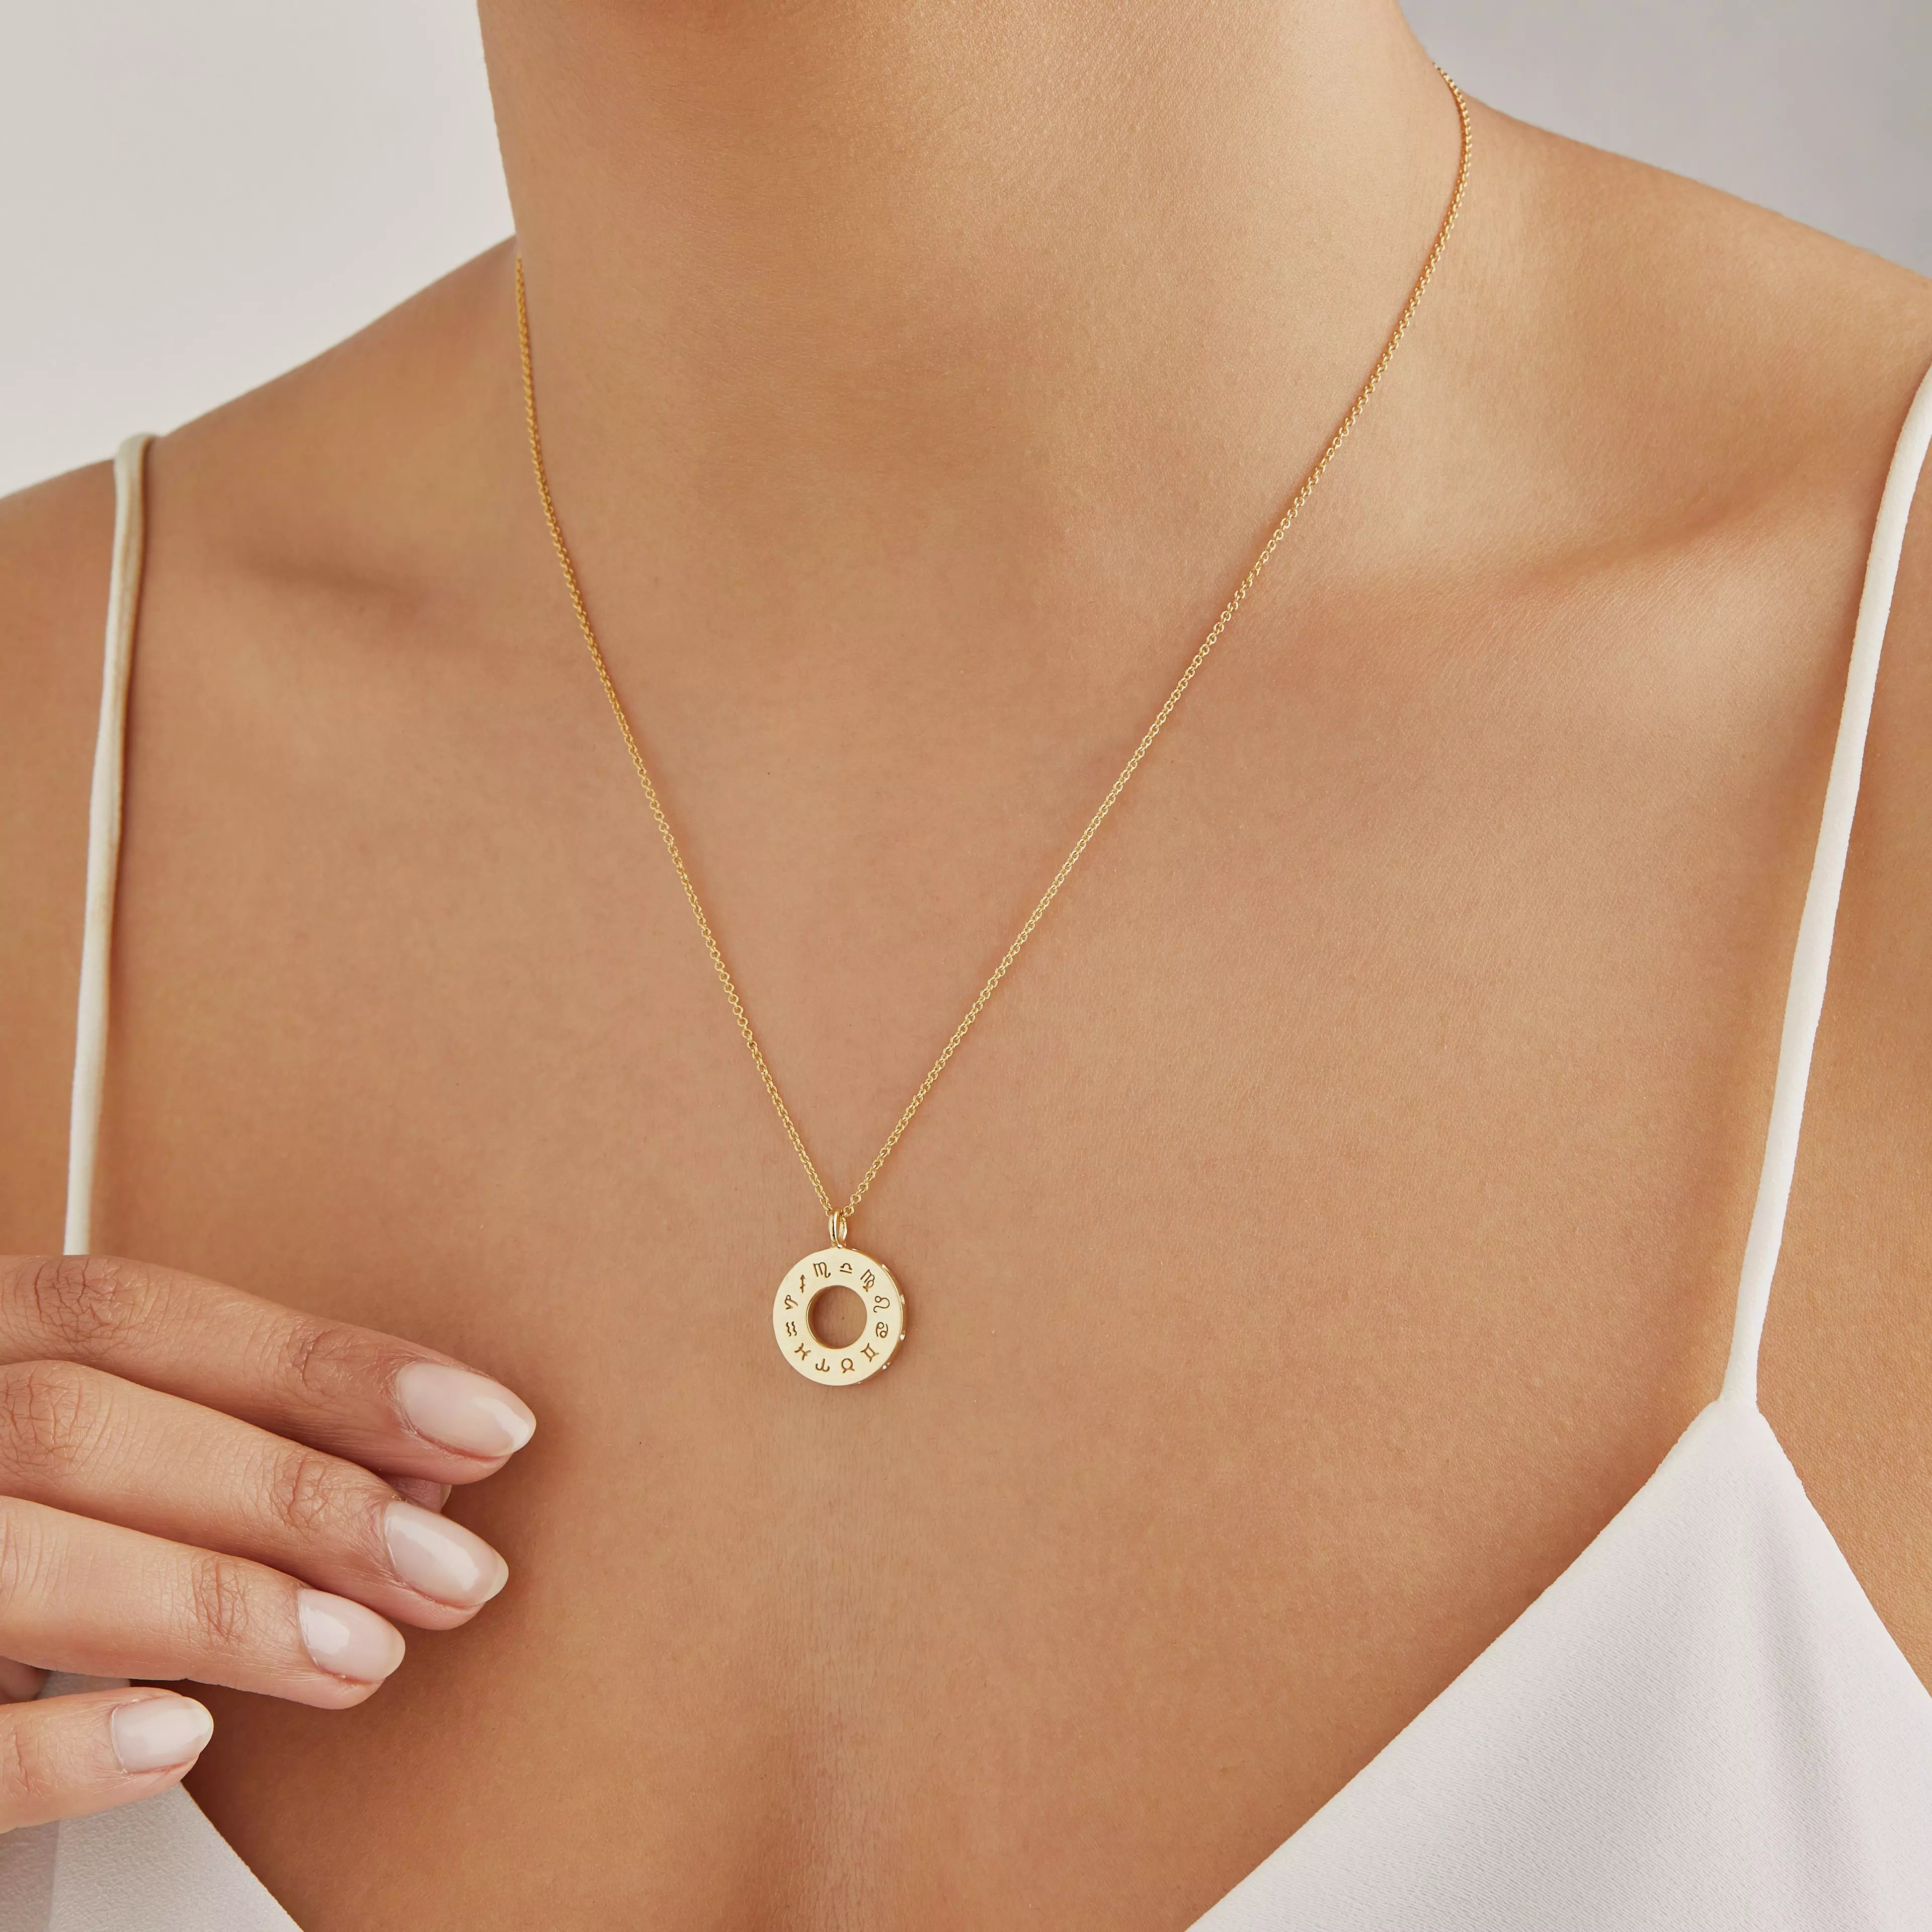 Gold zodiac birthstone necklace around a neck of a woman wearing a white strappy top